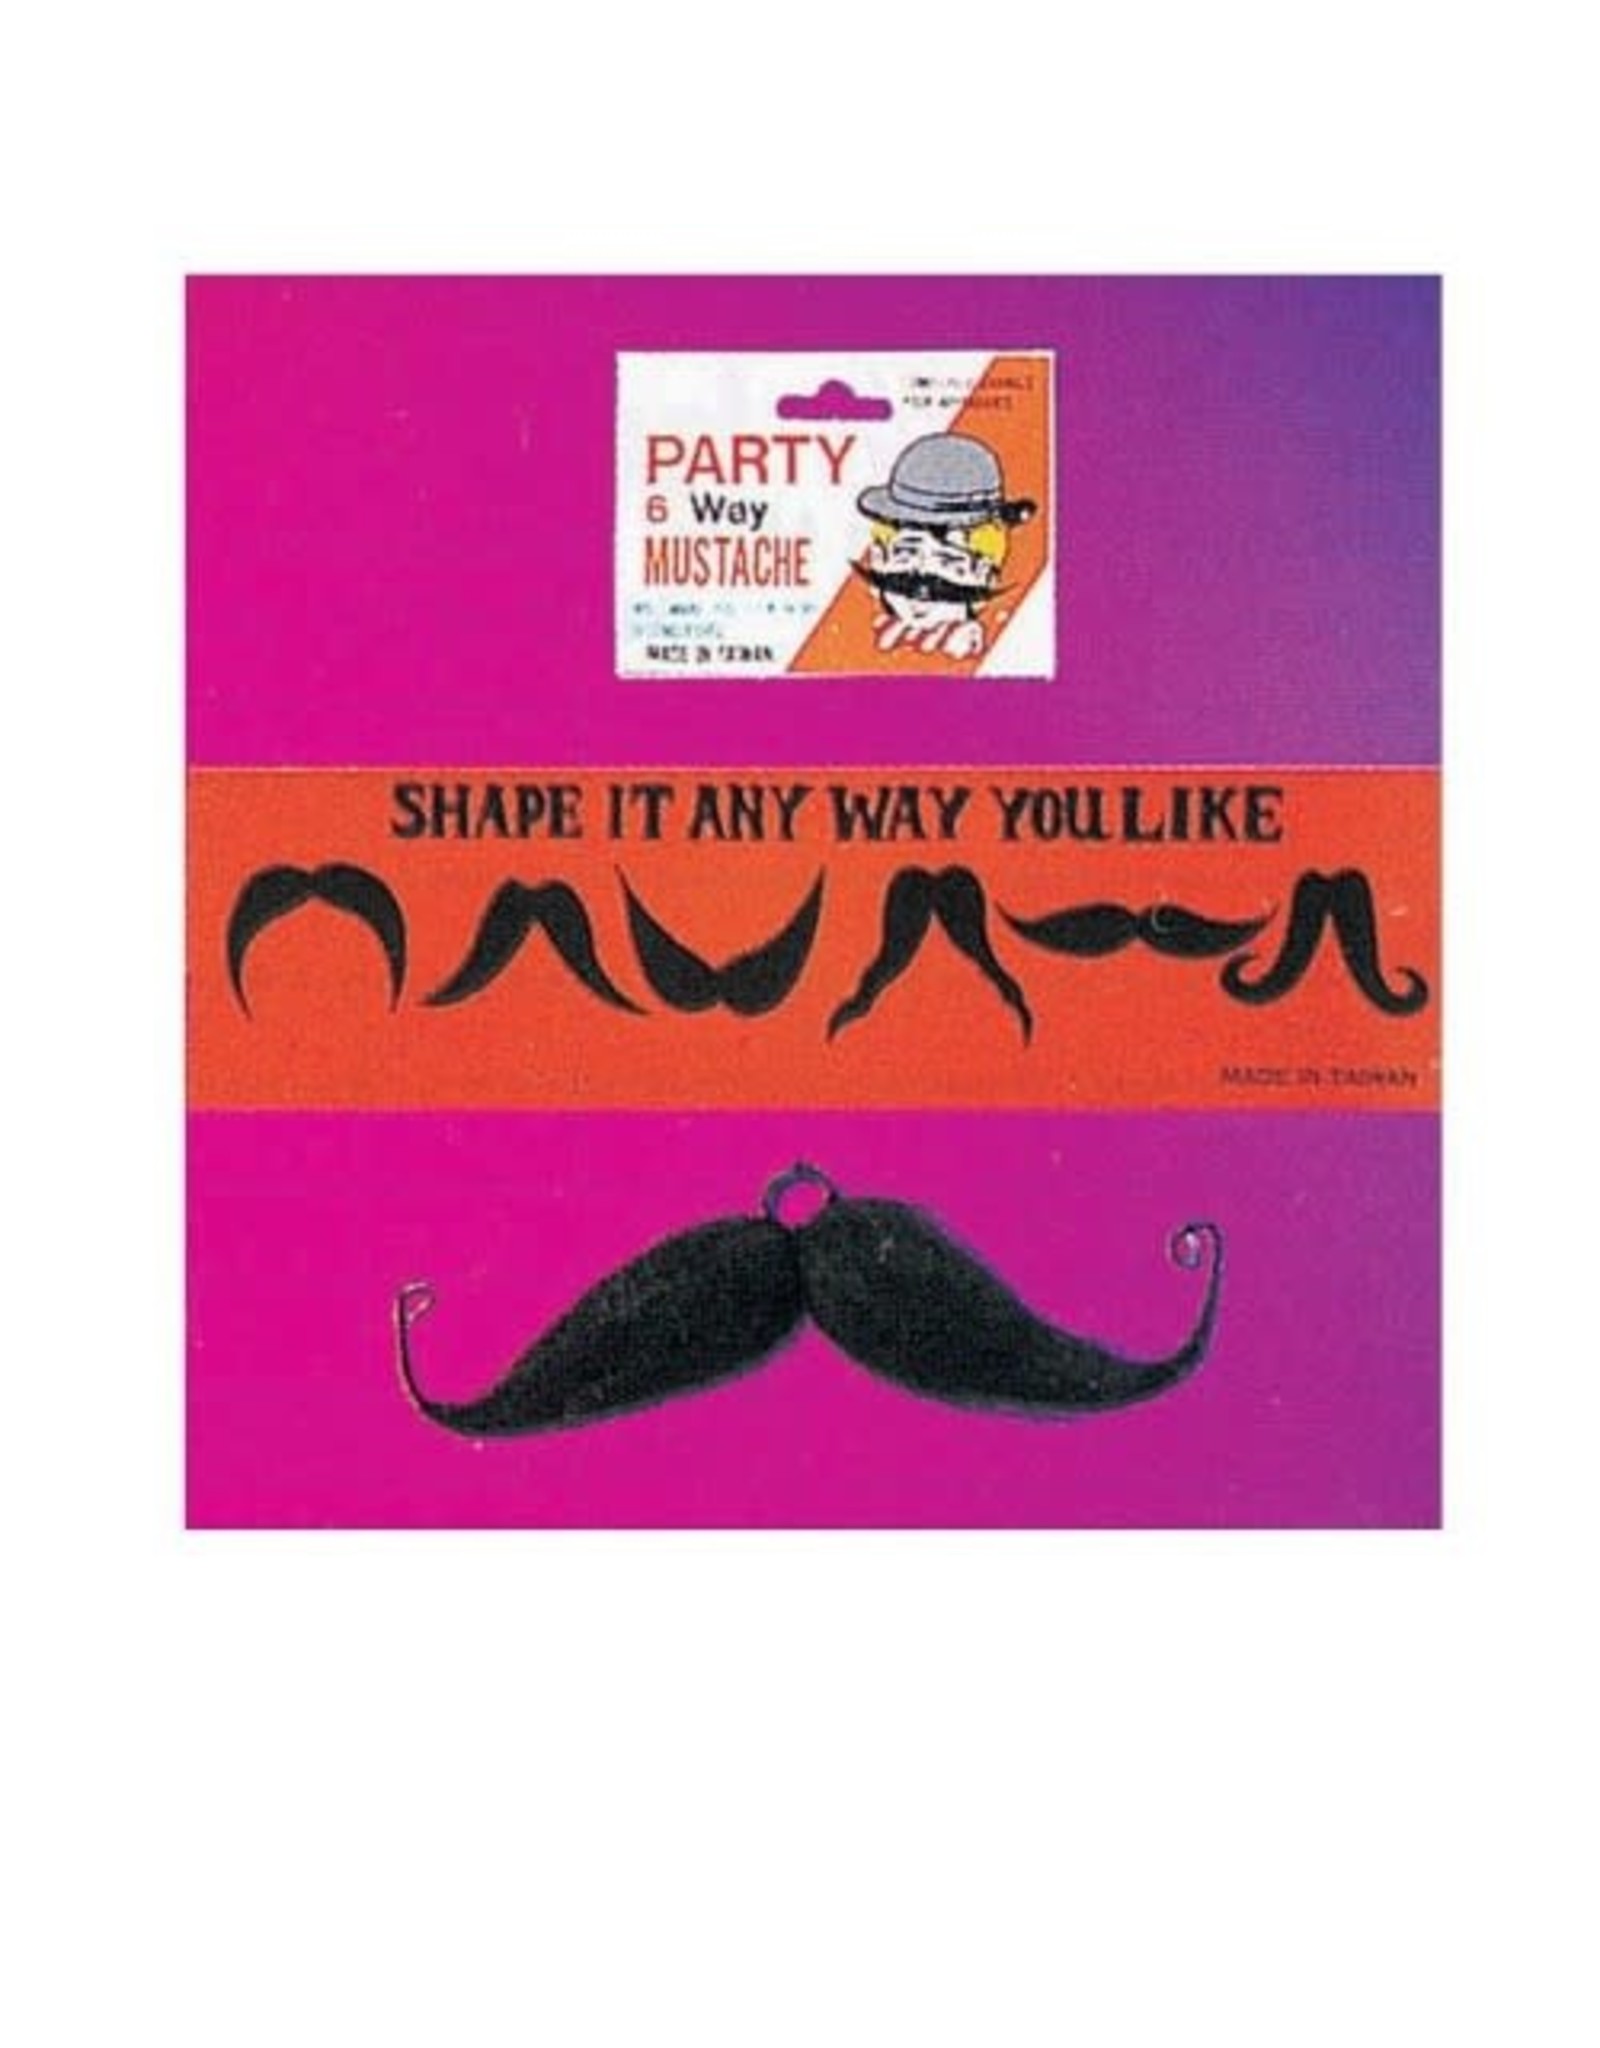 Rubie's Costumes 6-Way Moustache Adult Halloween Costume Accessory